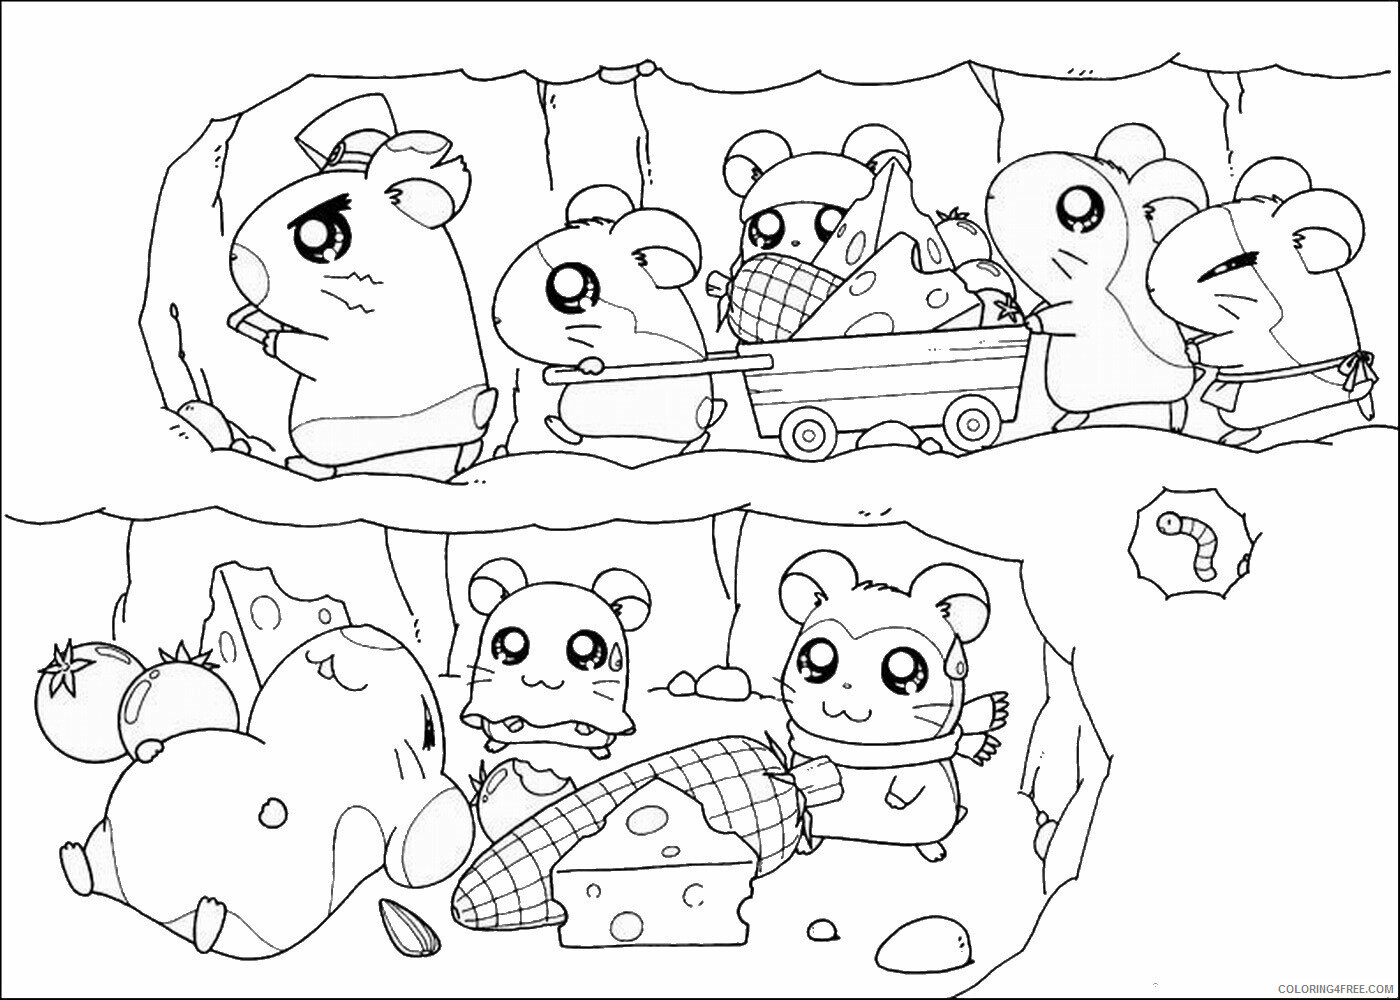 Hamtaro Printable Coloring Pages Anime hamtaro_coloring8 2021 0545 Coloring4free